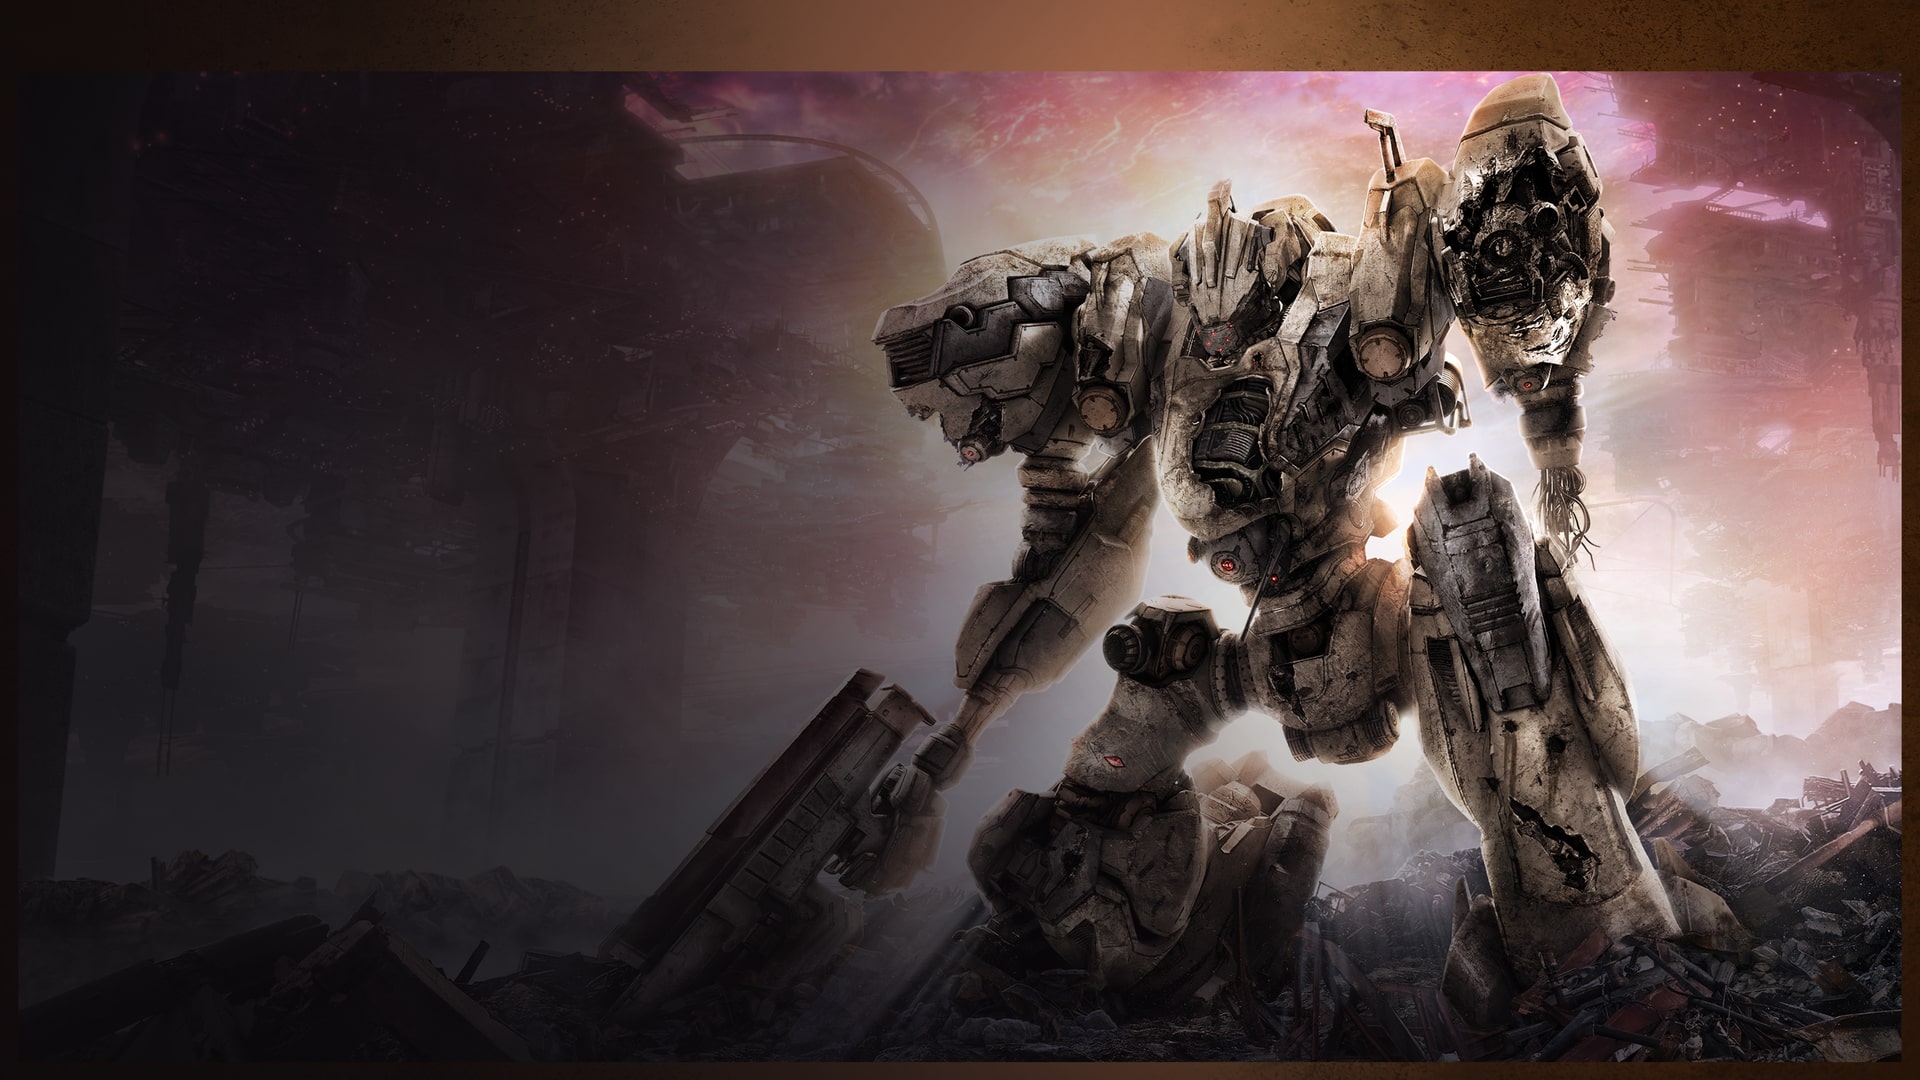 Share of the Week: Armored Core VI – PlayStation.Blog